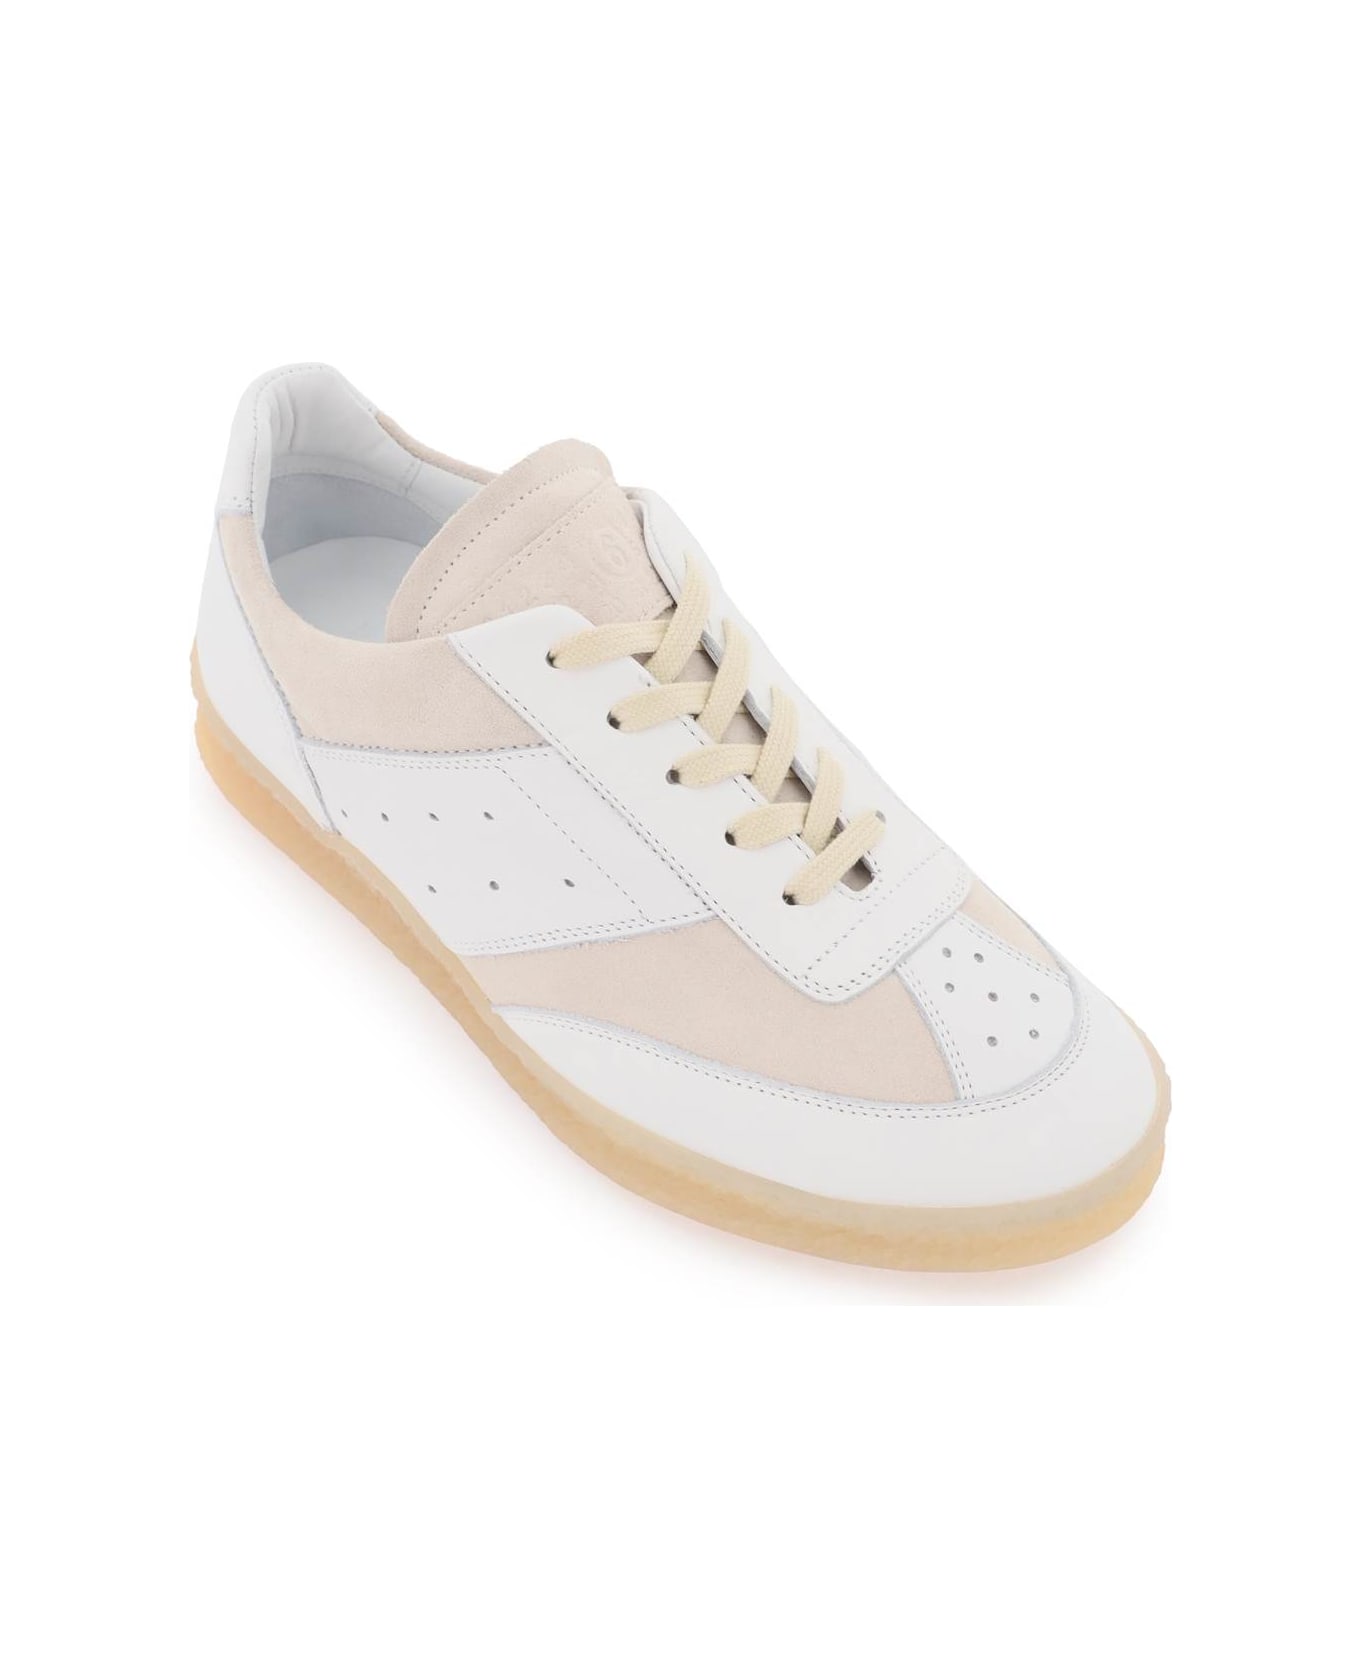 MM6 Maison Margiela 6 Court Leather Low-top Sneakers - White